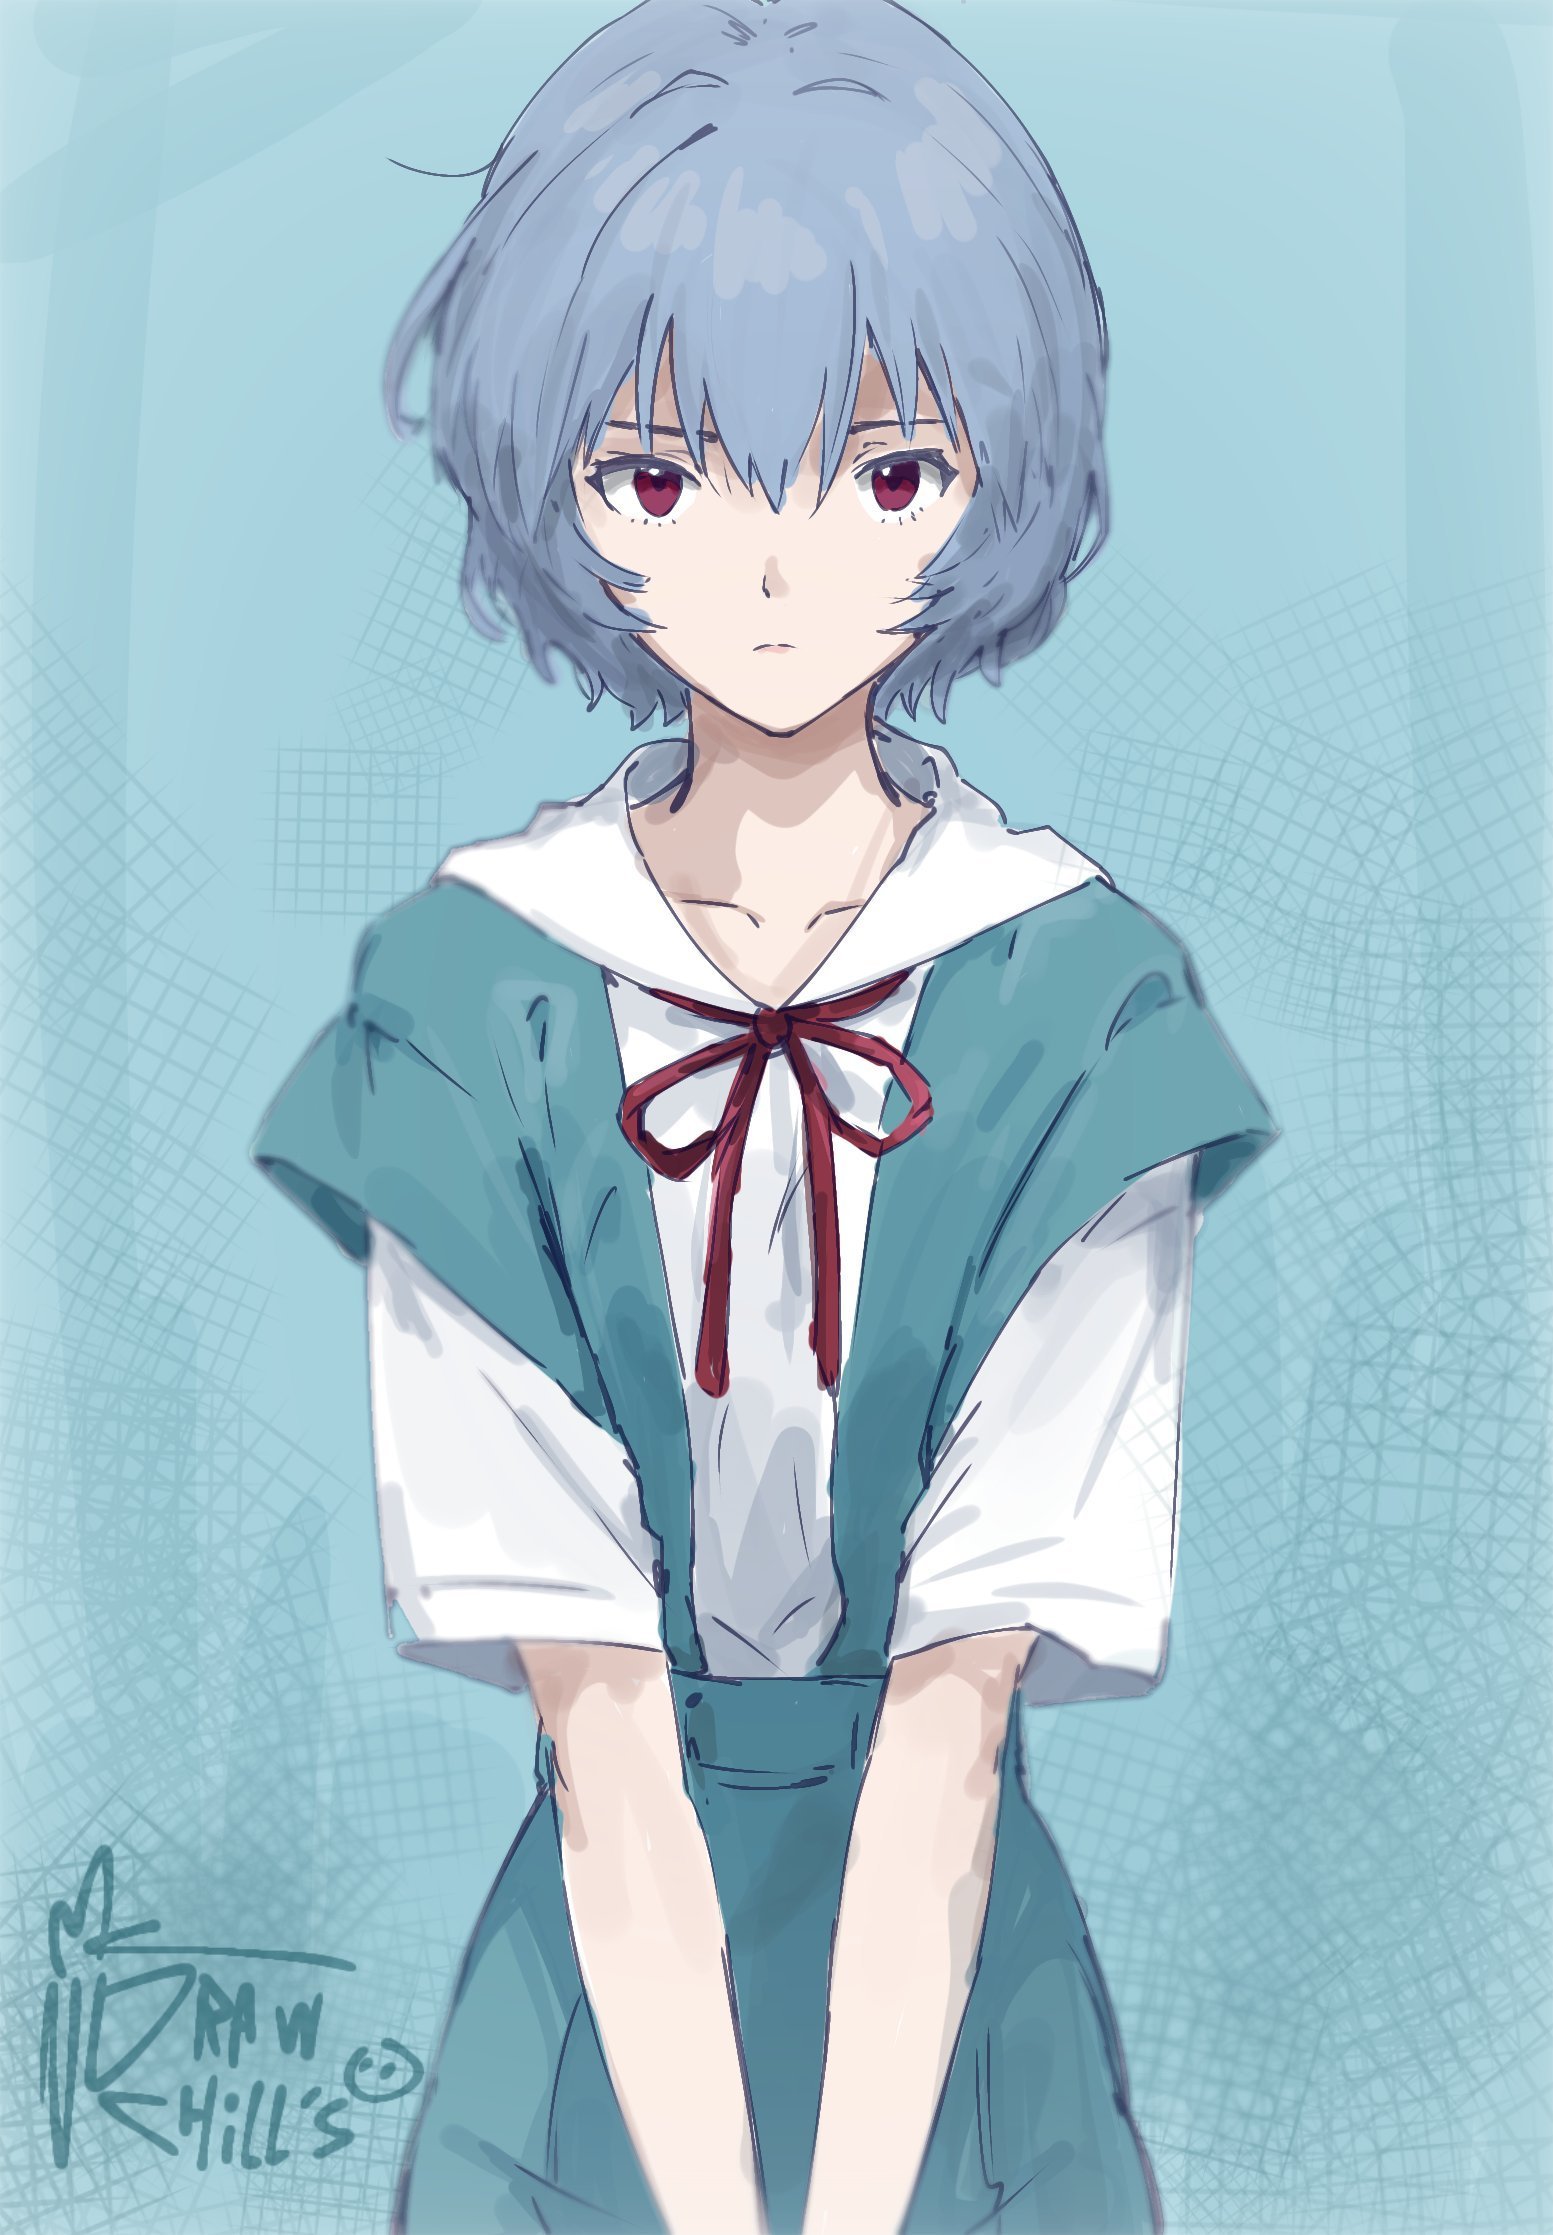 Ayanami Rei by Draw Chill's